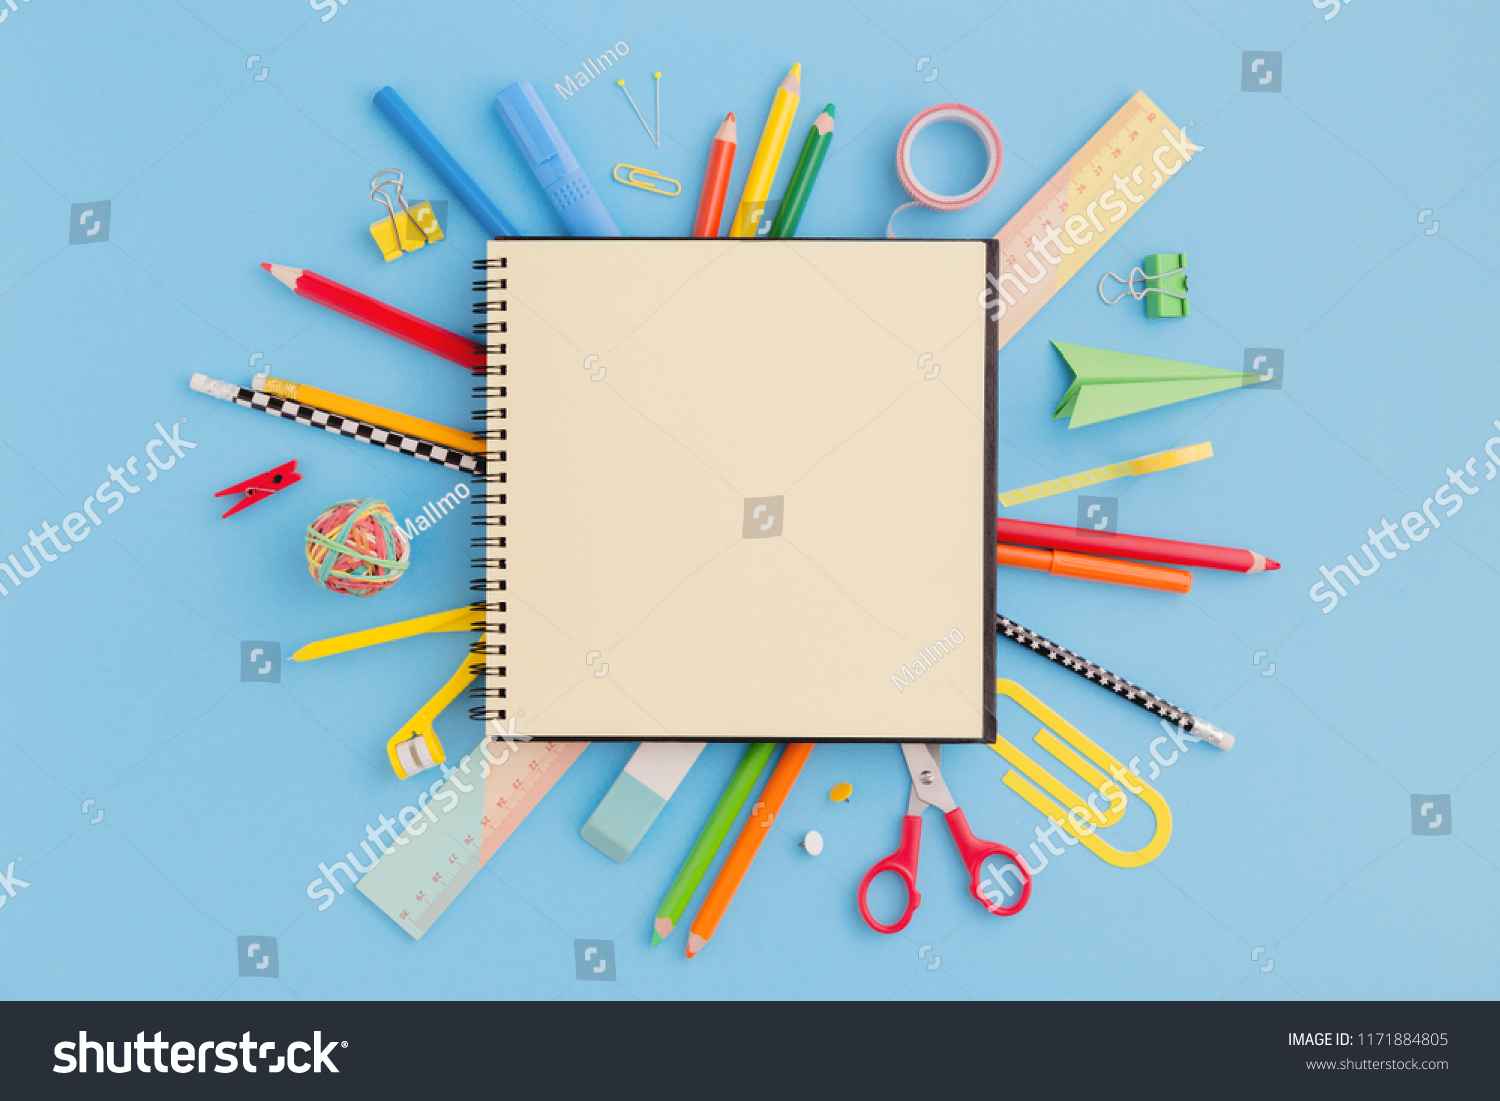 School notebook and various stationery. Back to school concept. #1171884805